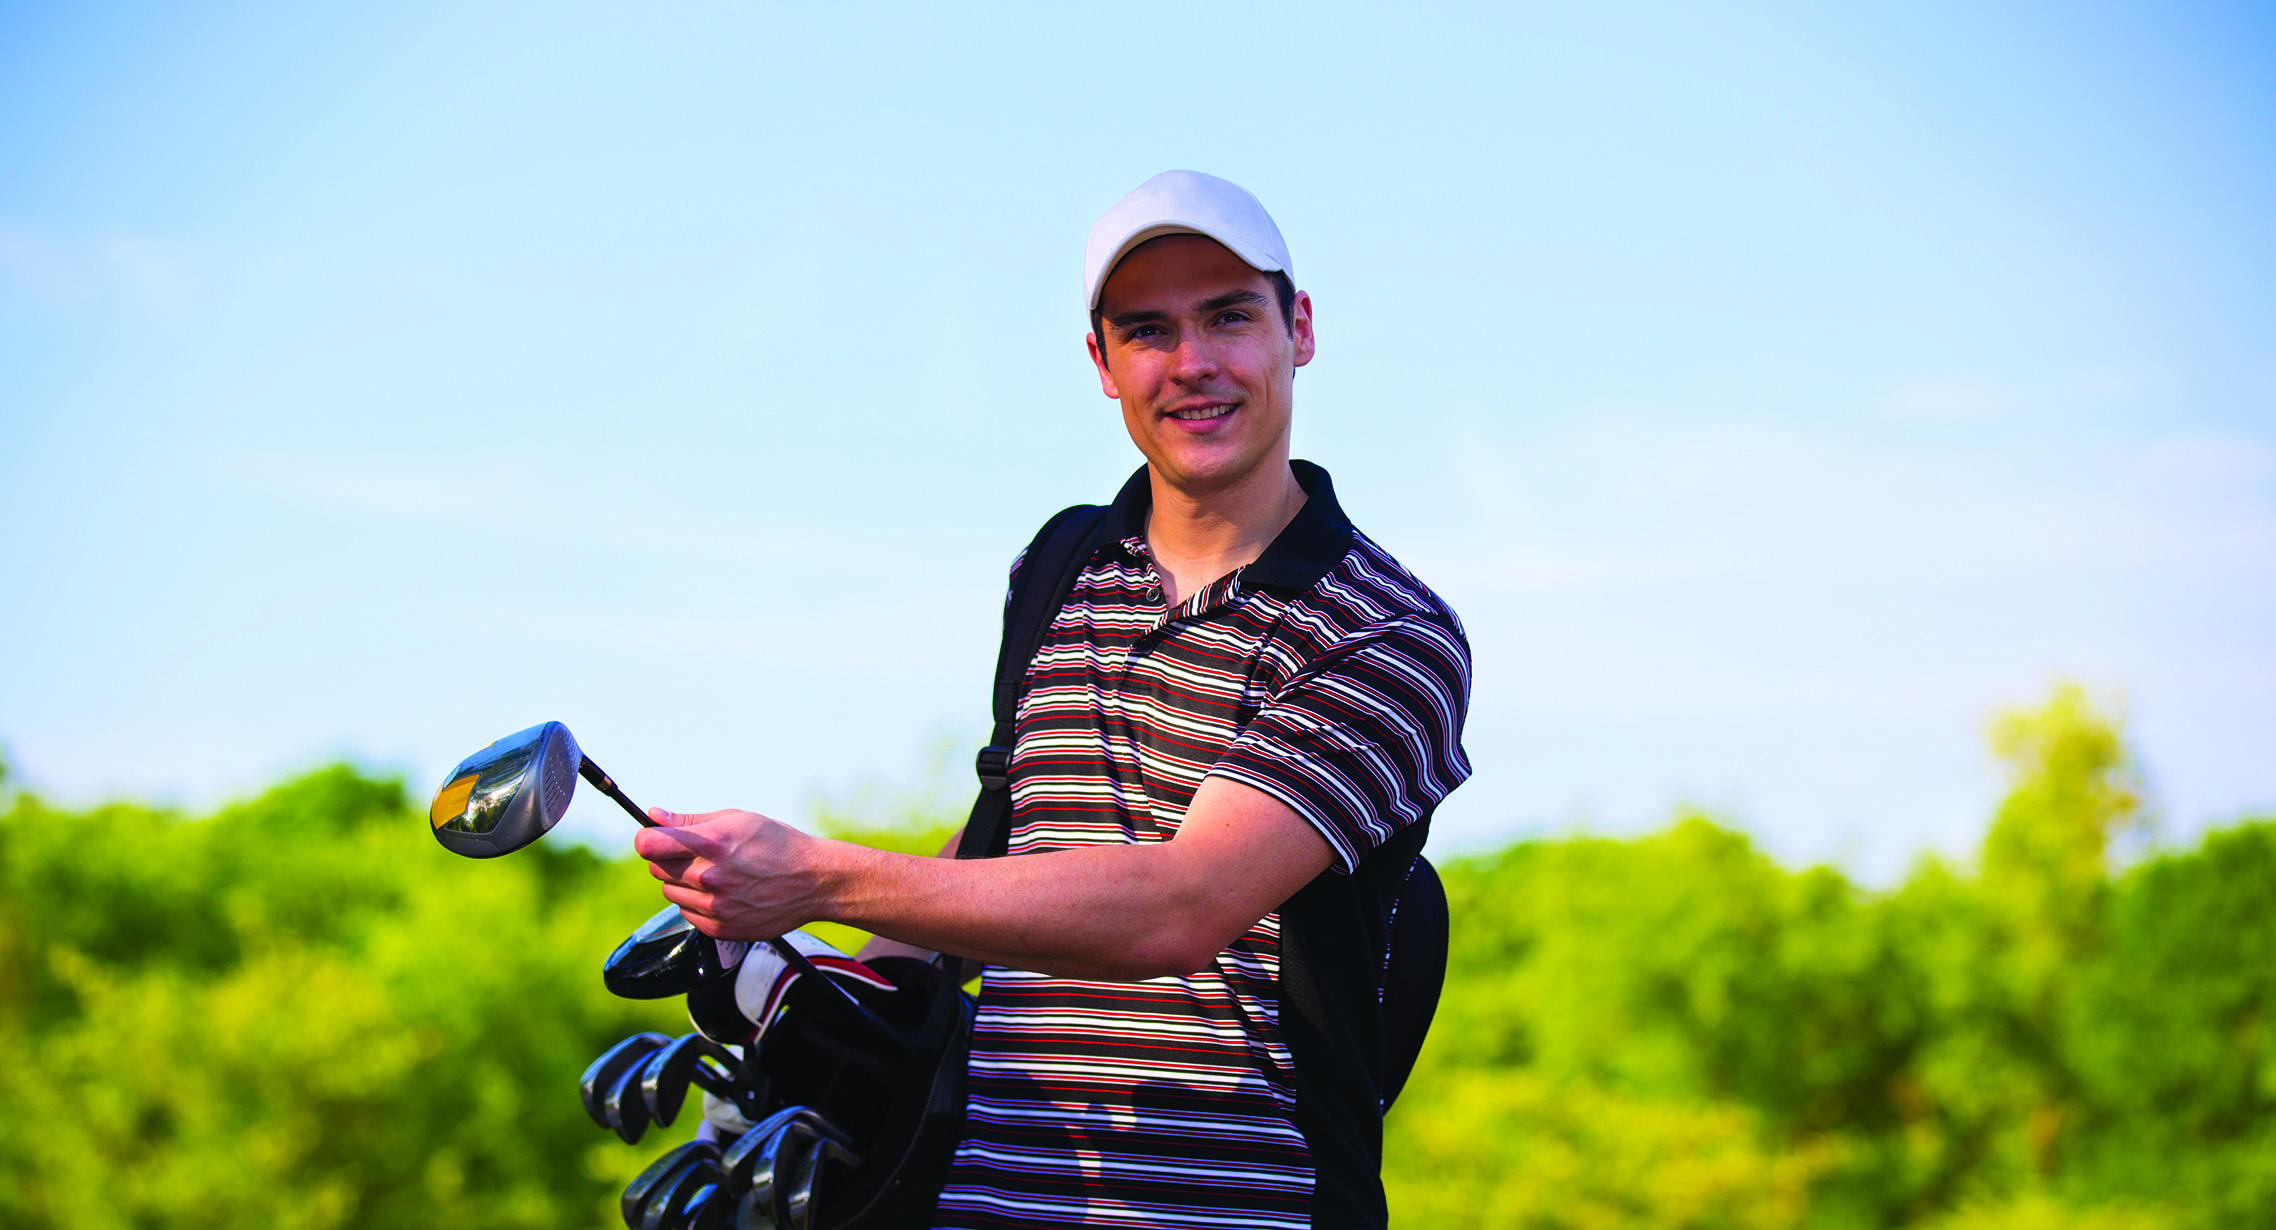 close-up of male golfer smiling for portrait